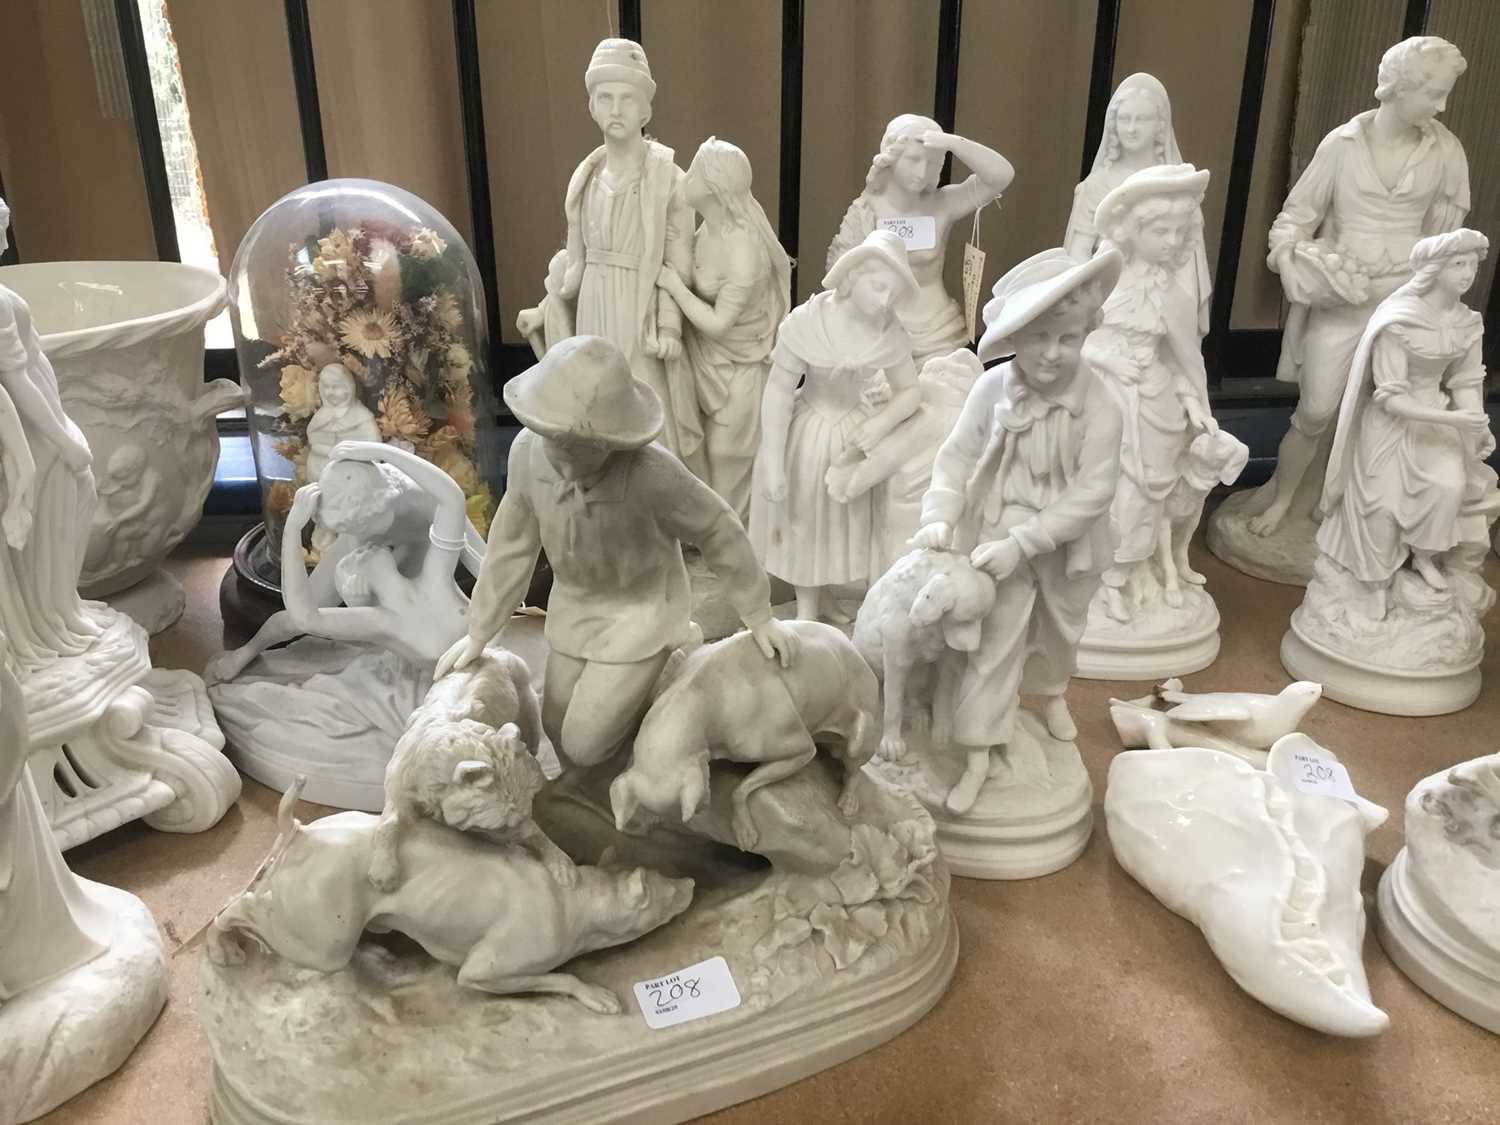 Large collection of 19th century Parian porcelain figures to include animals and figures - Image 3 of 5